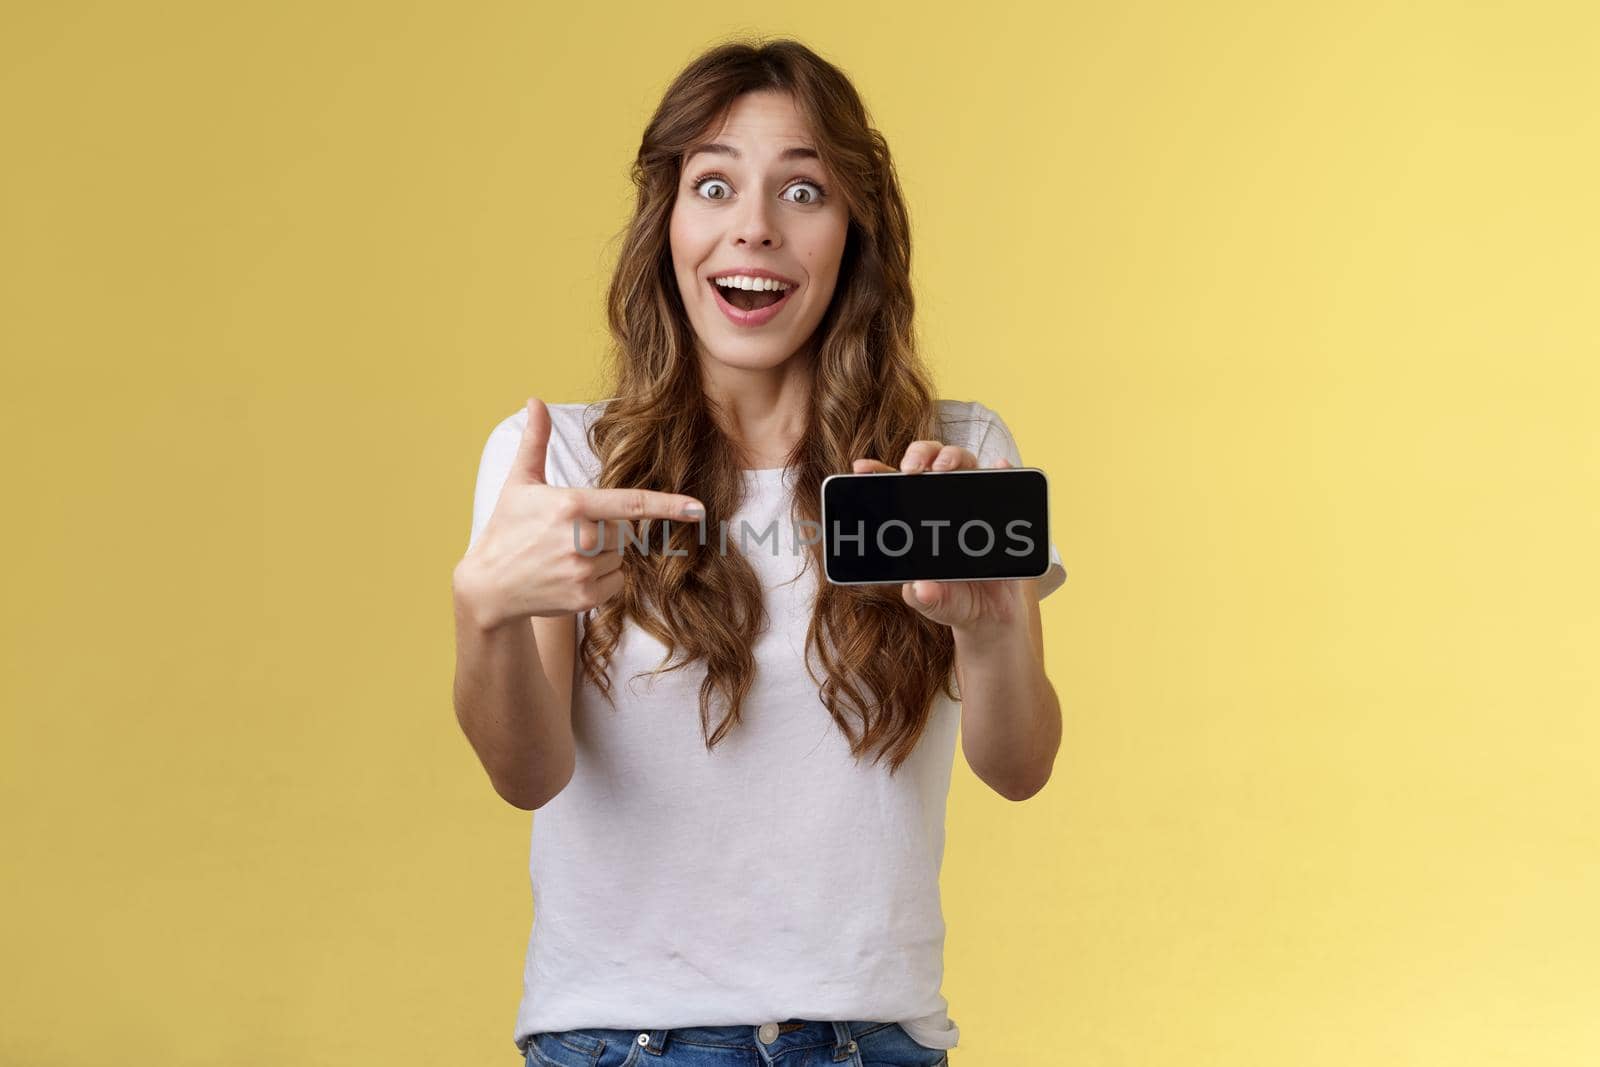 Impressed upbeat happy lucky girl curly long hairstyle open mouth admiration joy like awesome new app show smartphone screen horizontal phone display stand yellow background amazed. Lifestyle.